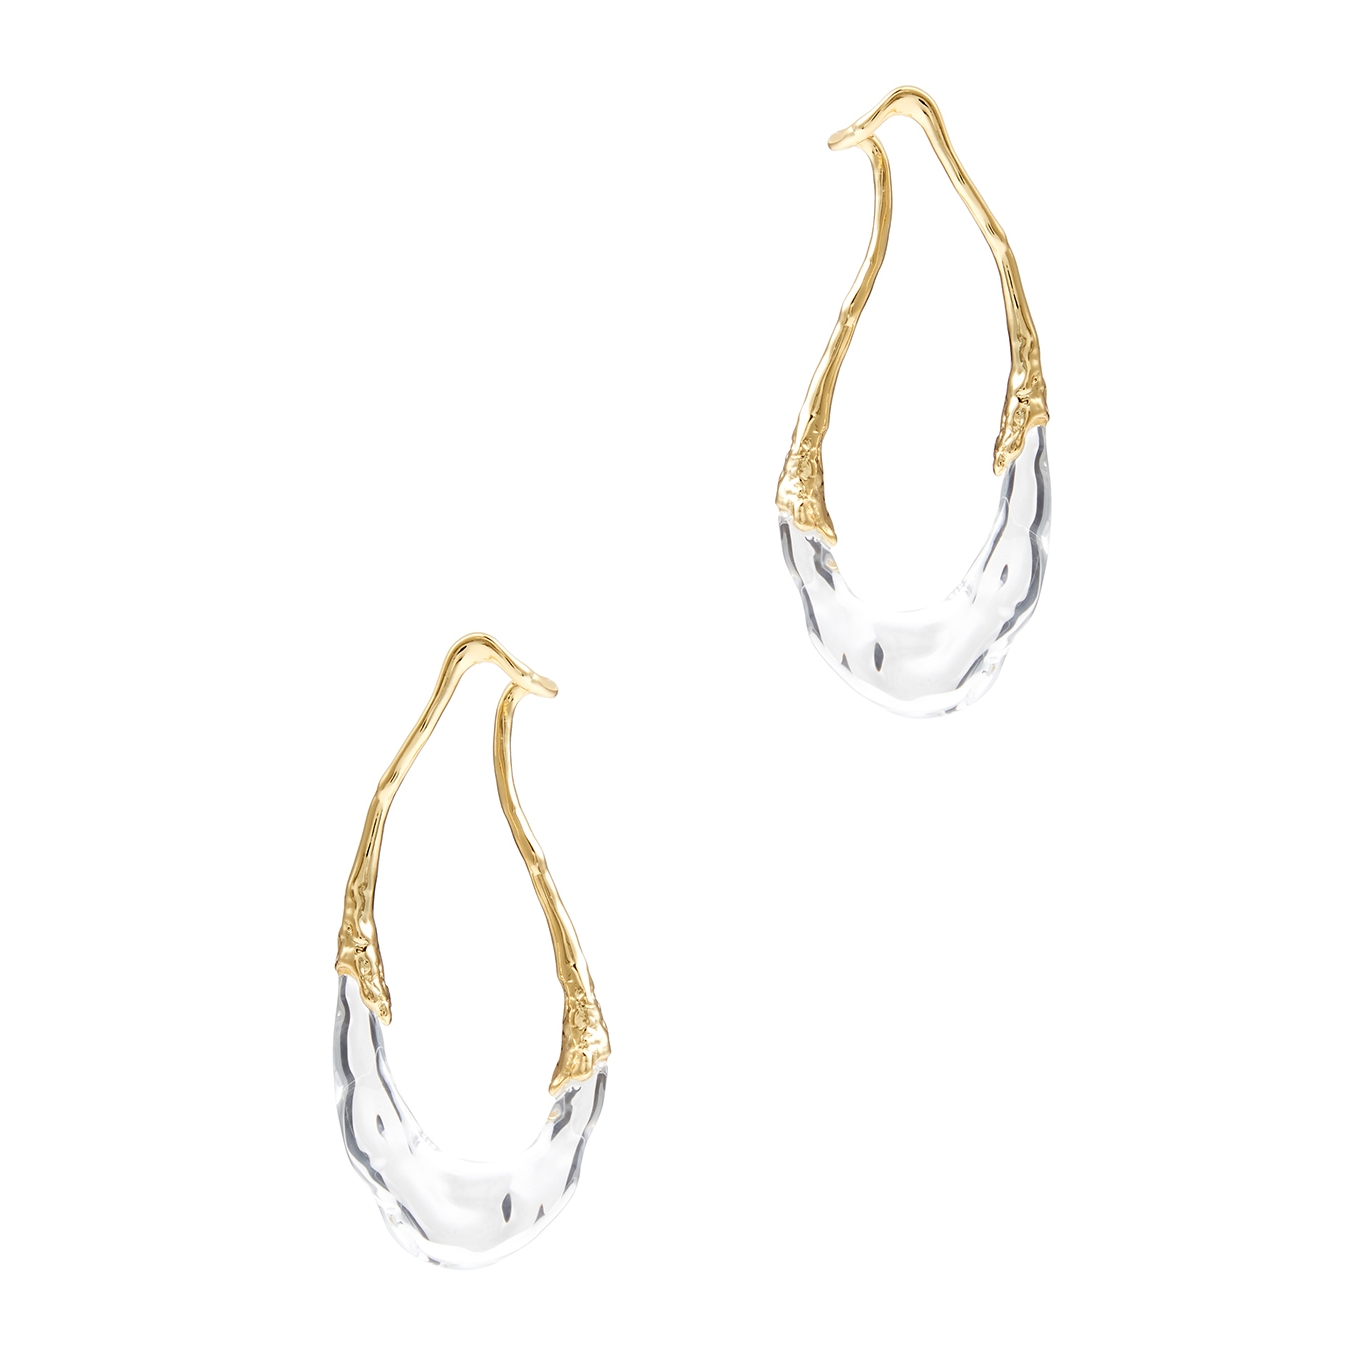 Alexis Bittar Dream Rain Lucite And 14kt Gold-plated Earrings